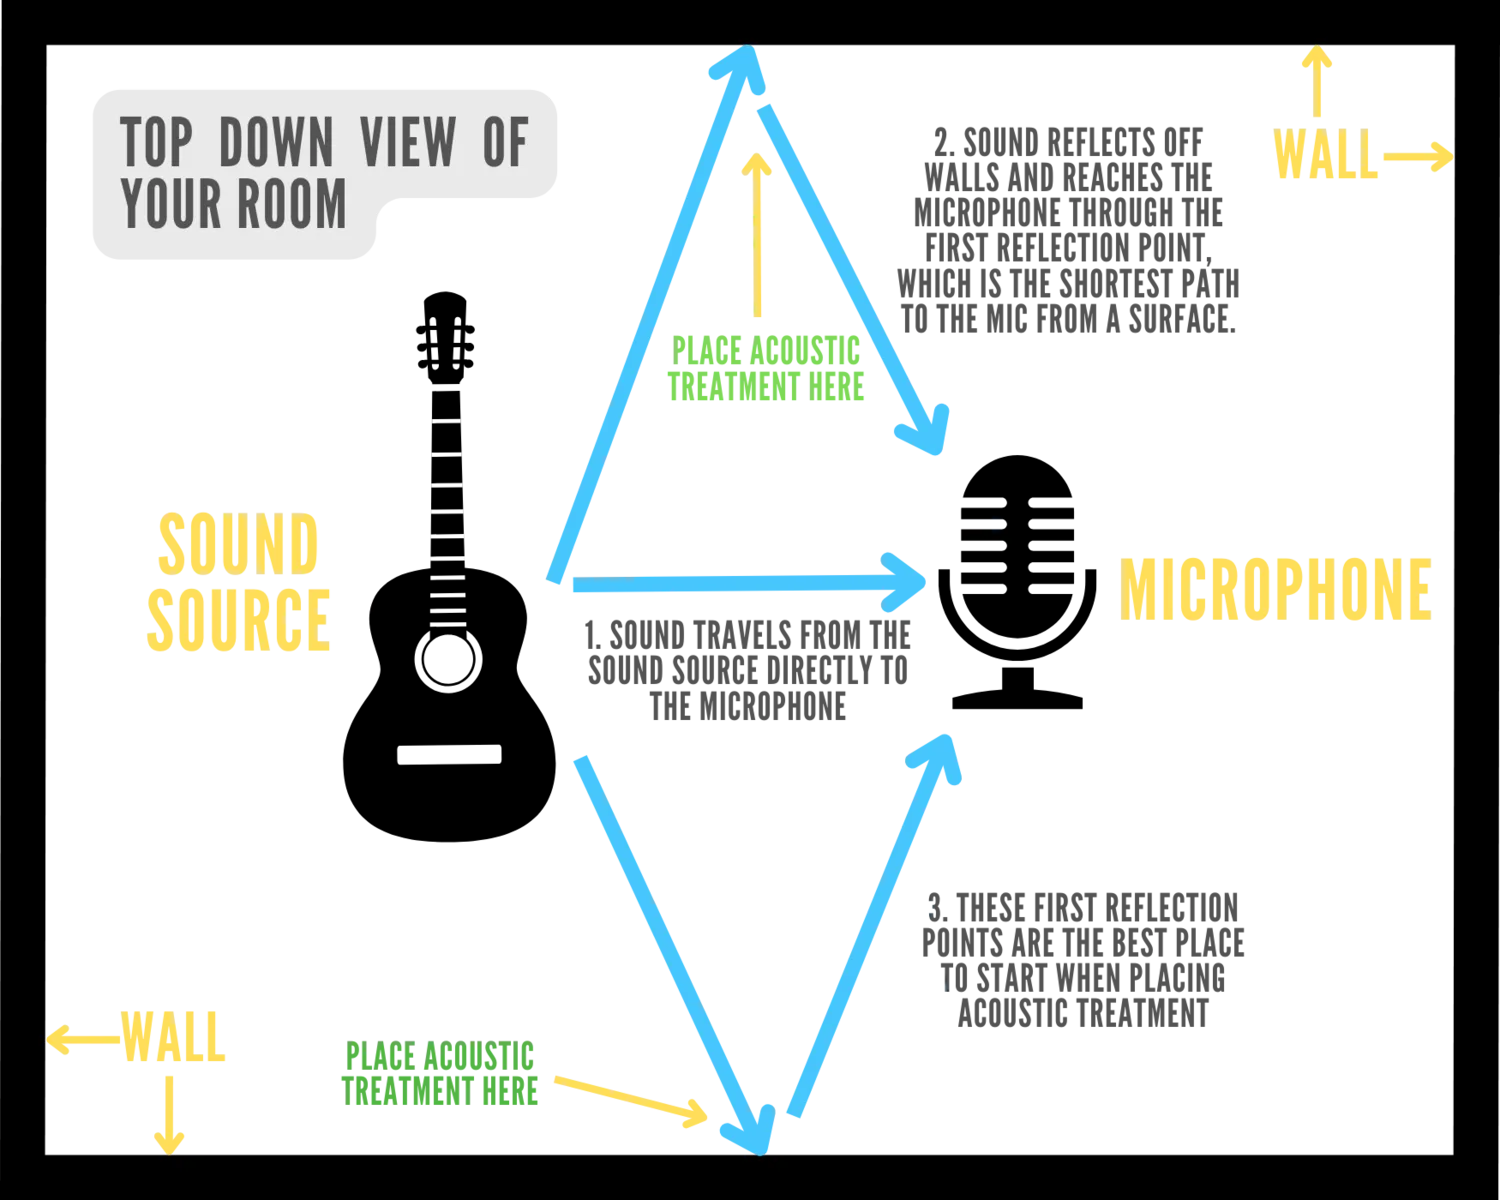 This overhead image vividly illustrates the early reflection points of sound waves within a room, highlighting the journey of sound from the source to the capturing microphone. It serves as a comprehensive guide for identifying prime locations for acoustic treatments, an essential step in mitigating common recording issues such as isolation, unwanted reflections, and phase interference in untreated rooms. This visual representation is crucial for those aiming to understand and improve room acoustics, ensuring cleaner and more accurate recordings by addressing the major acoustic challenges that arise when recording in a space without proper treatment.